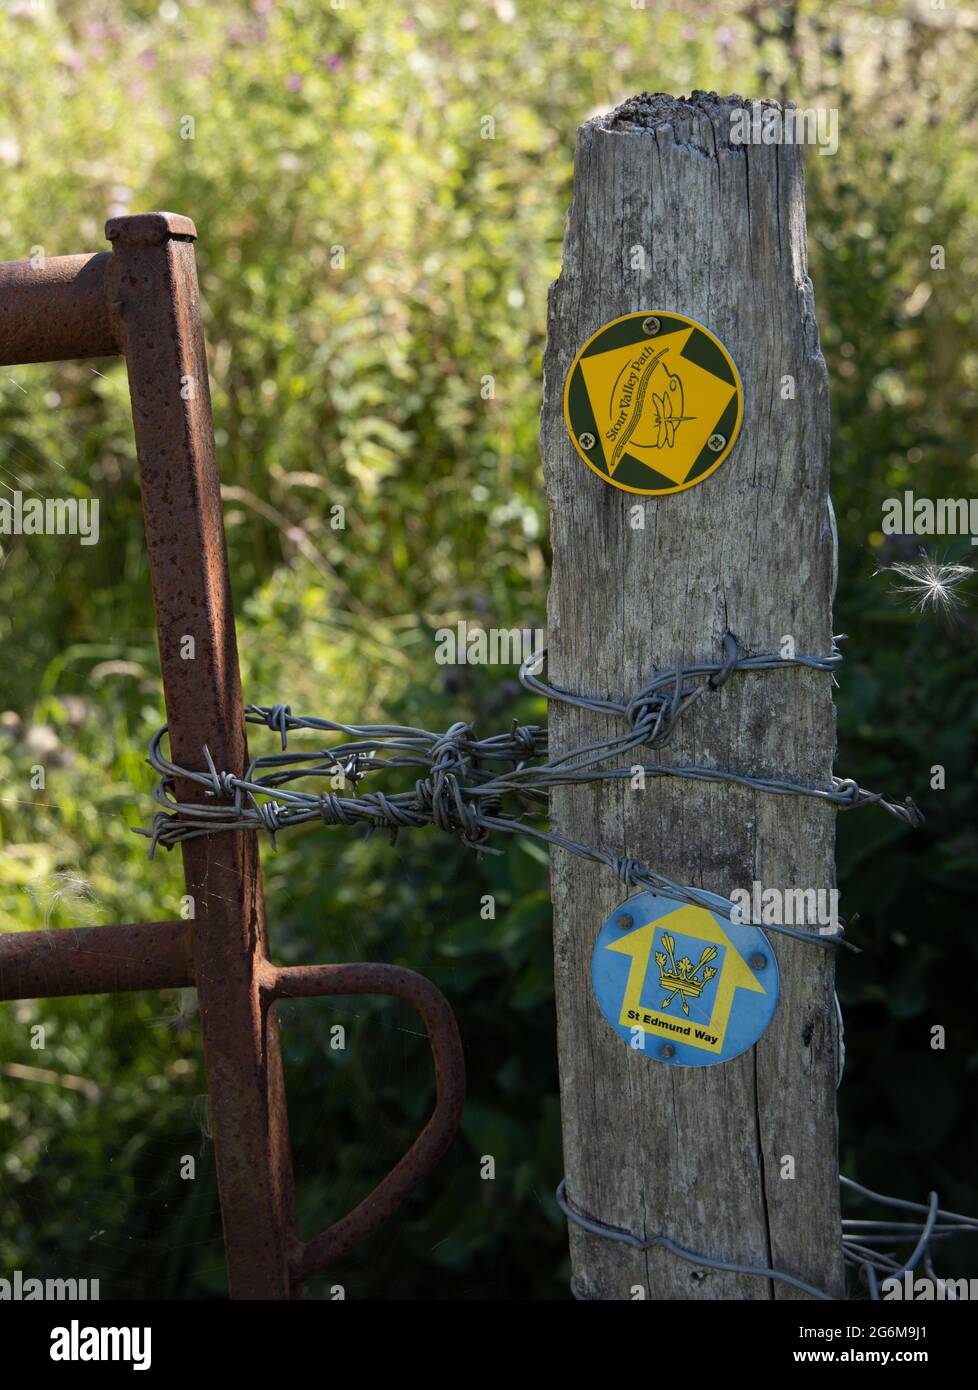 St Edmund Way a long distance walking route signs on wooden post with barbed wire. A route across Suffolk, Stour Valley Path (East Anglia) England Stock Photo